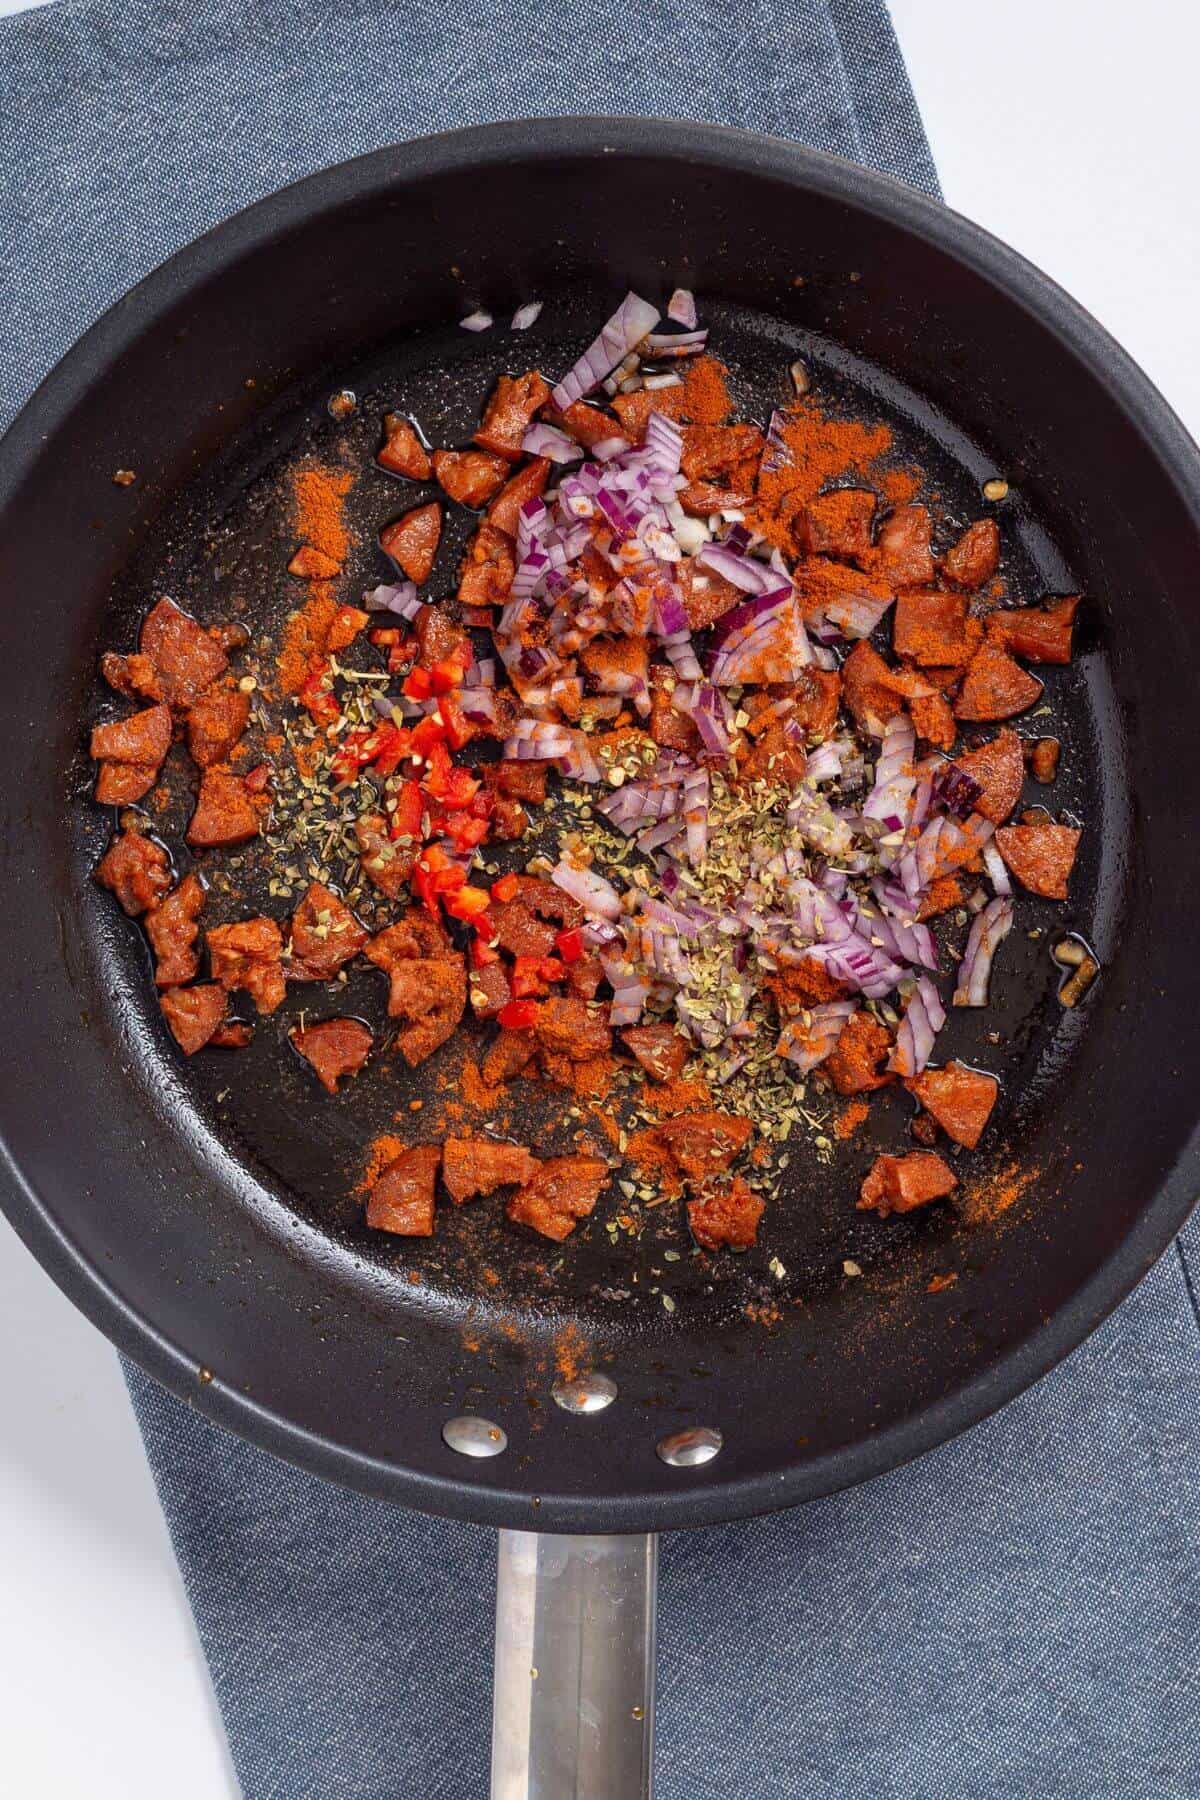 Onion and seasoning added to chorizo in skillet.